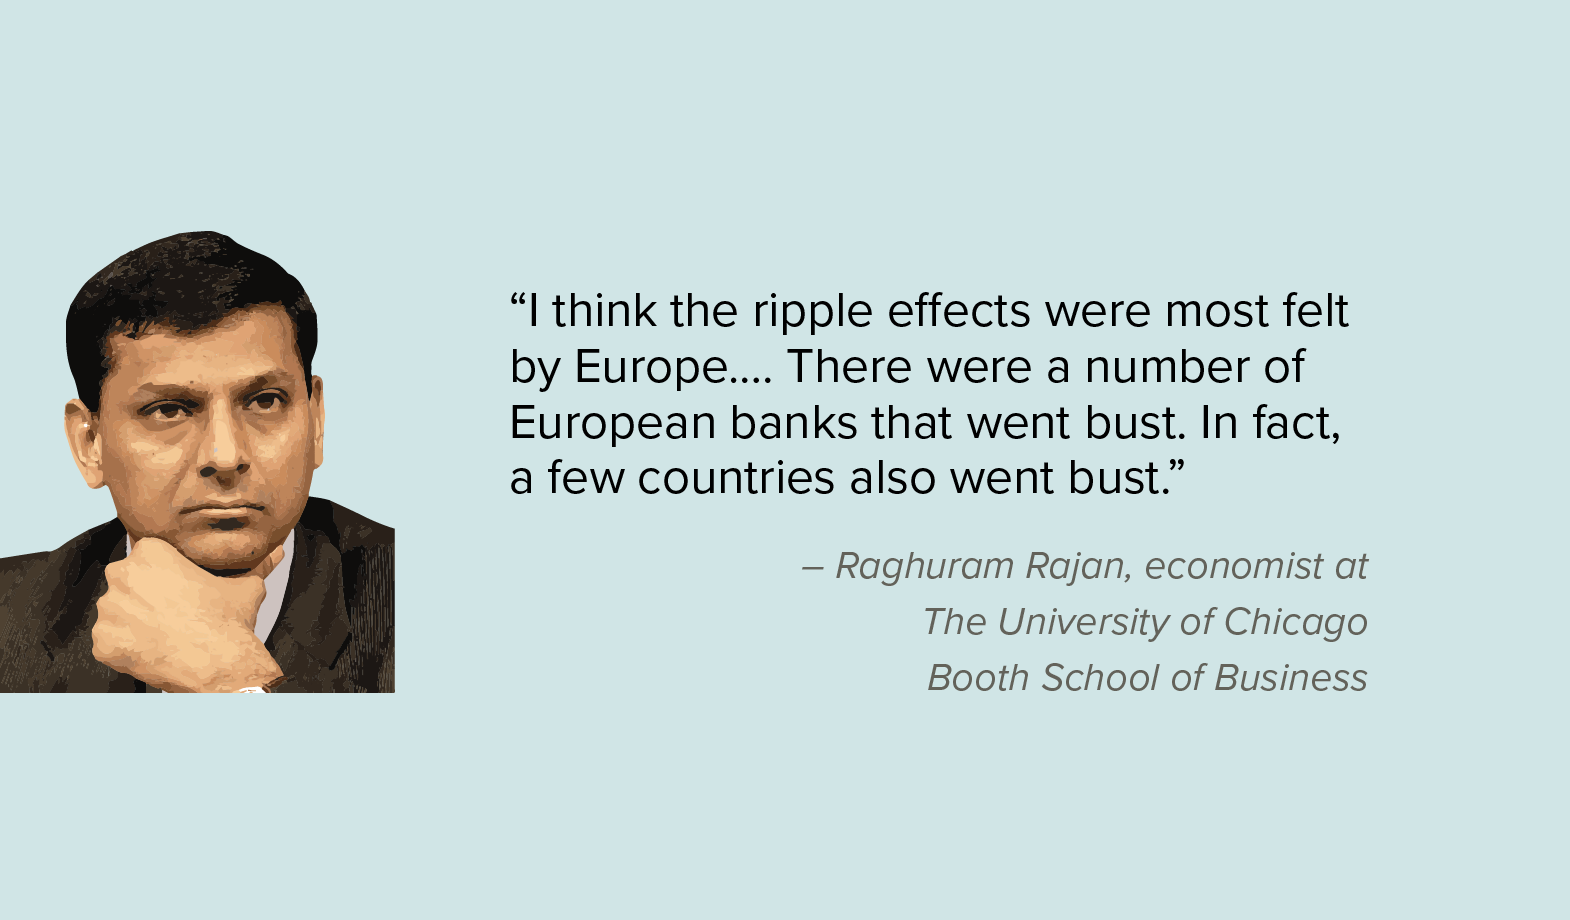 “I think the ripple effects were most felt by Europe…. There were a number of European banks that went bust. In fact, a few countries also went bust.” — Raghuram Rajan, economist